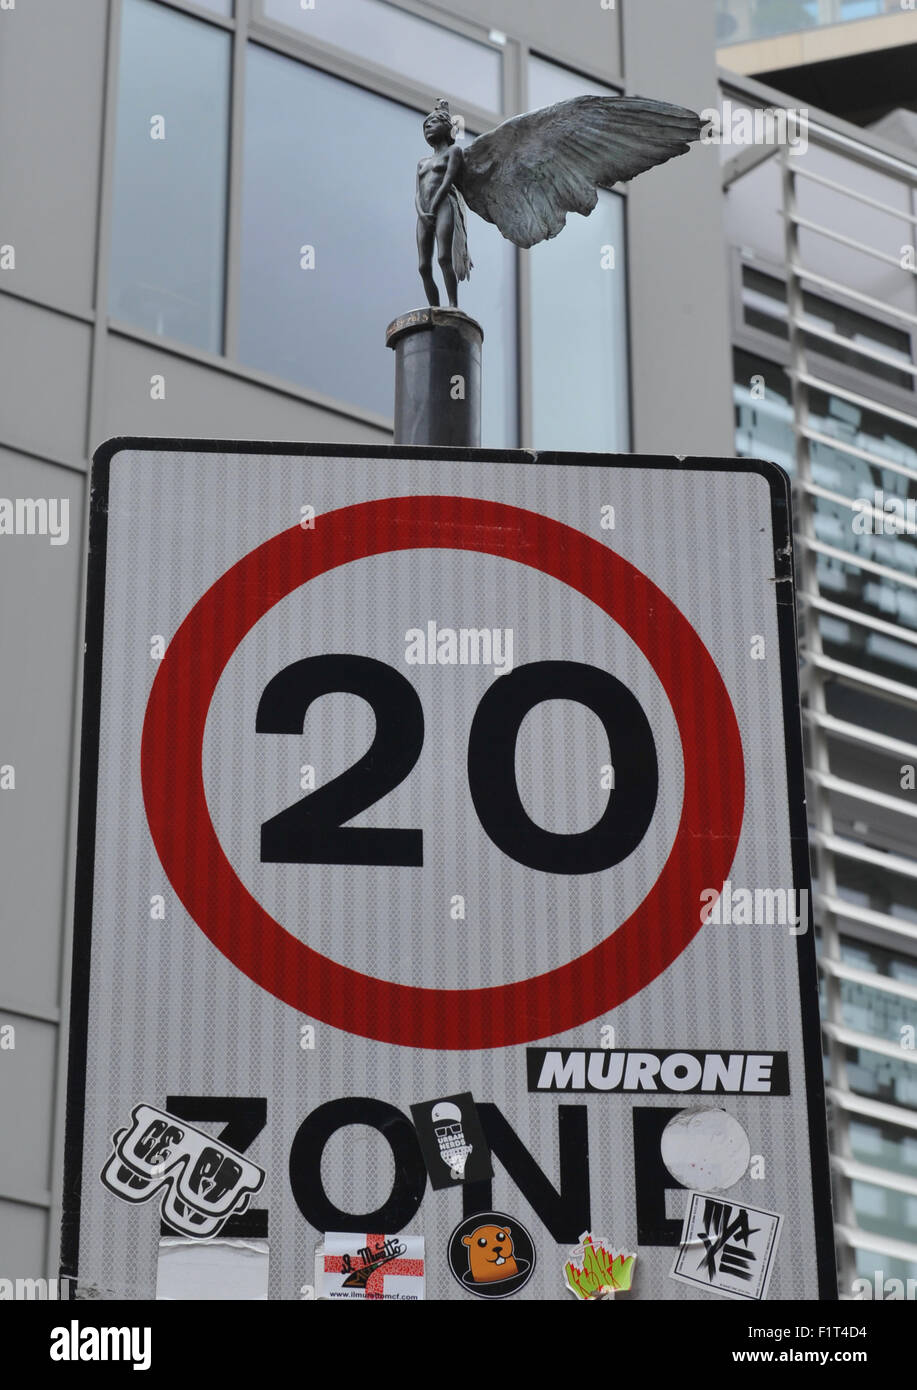 20 mph Speed zone control sign with hidden street art, City of London, UK Stock Photo